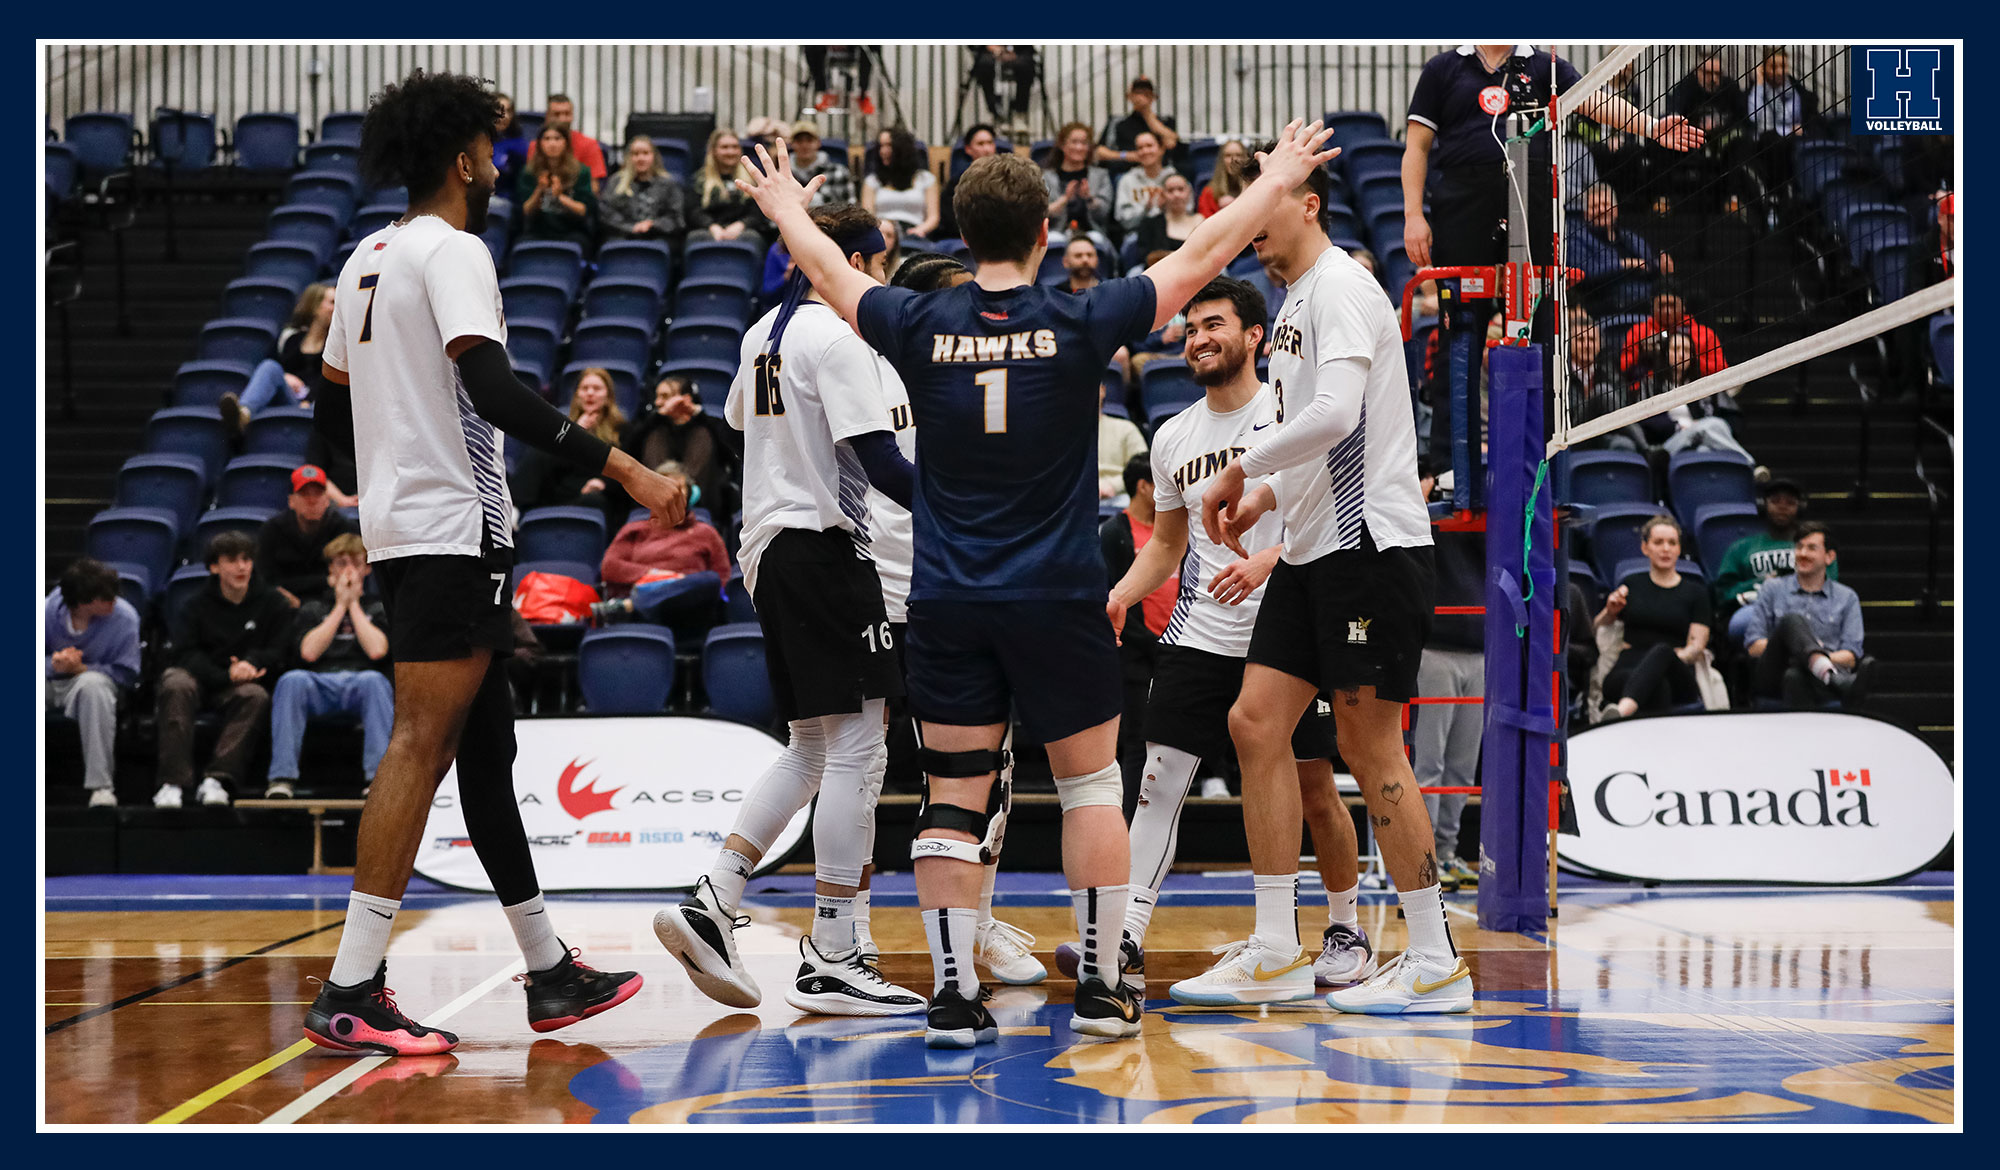 Men's Volleyball heading to CCAA bronze medal match